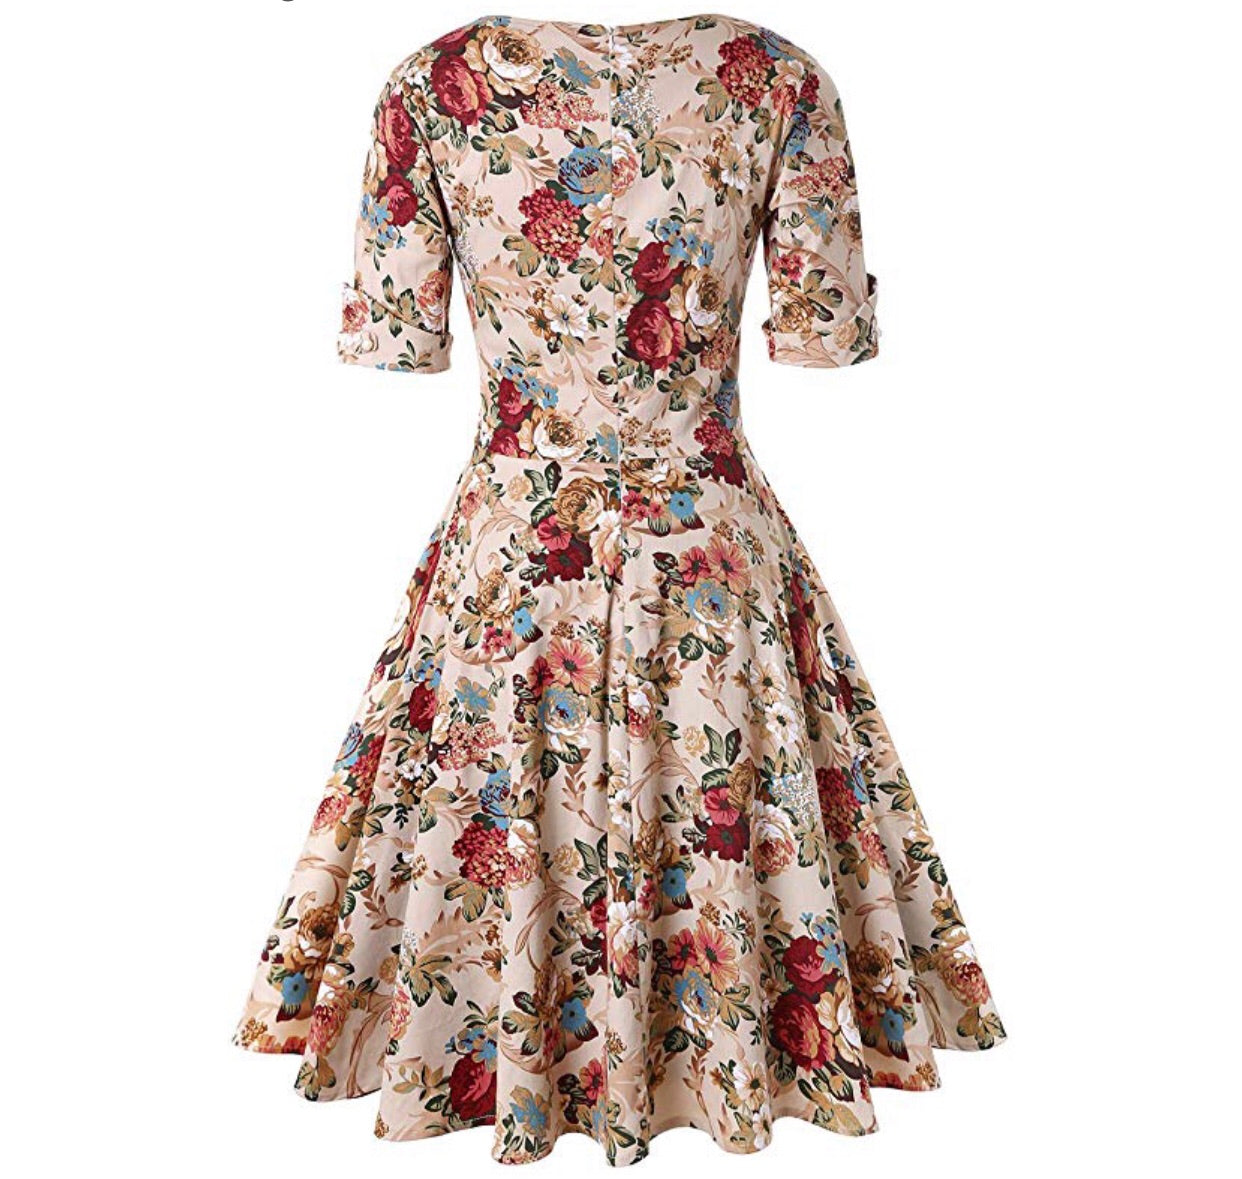 V-Neck Retro Look Swing Dress, Sizes Small - 2XLarge (US Sizes 4 - 22) Floral Apricot